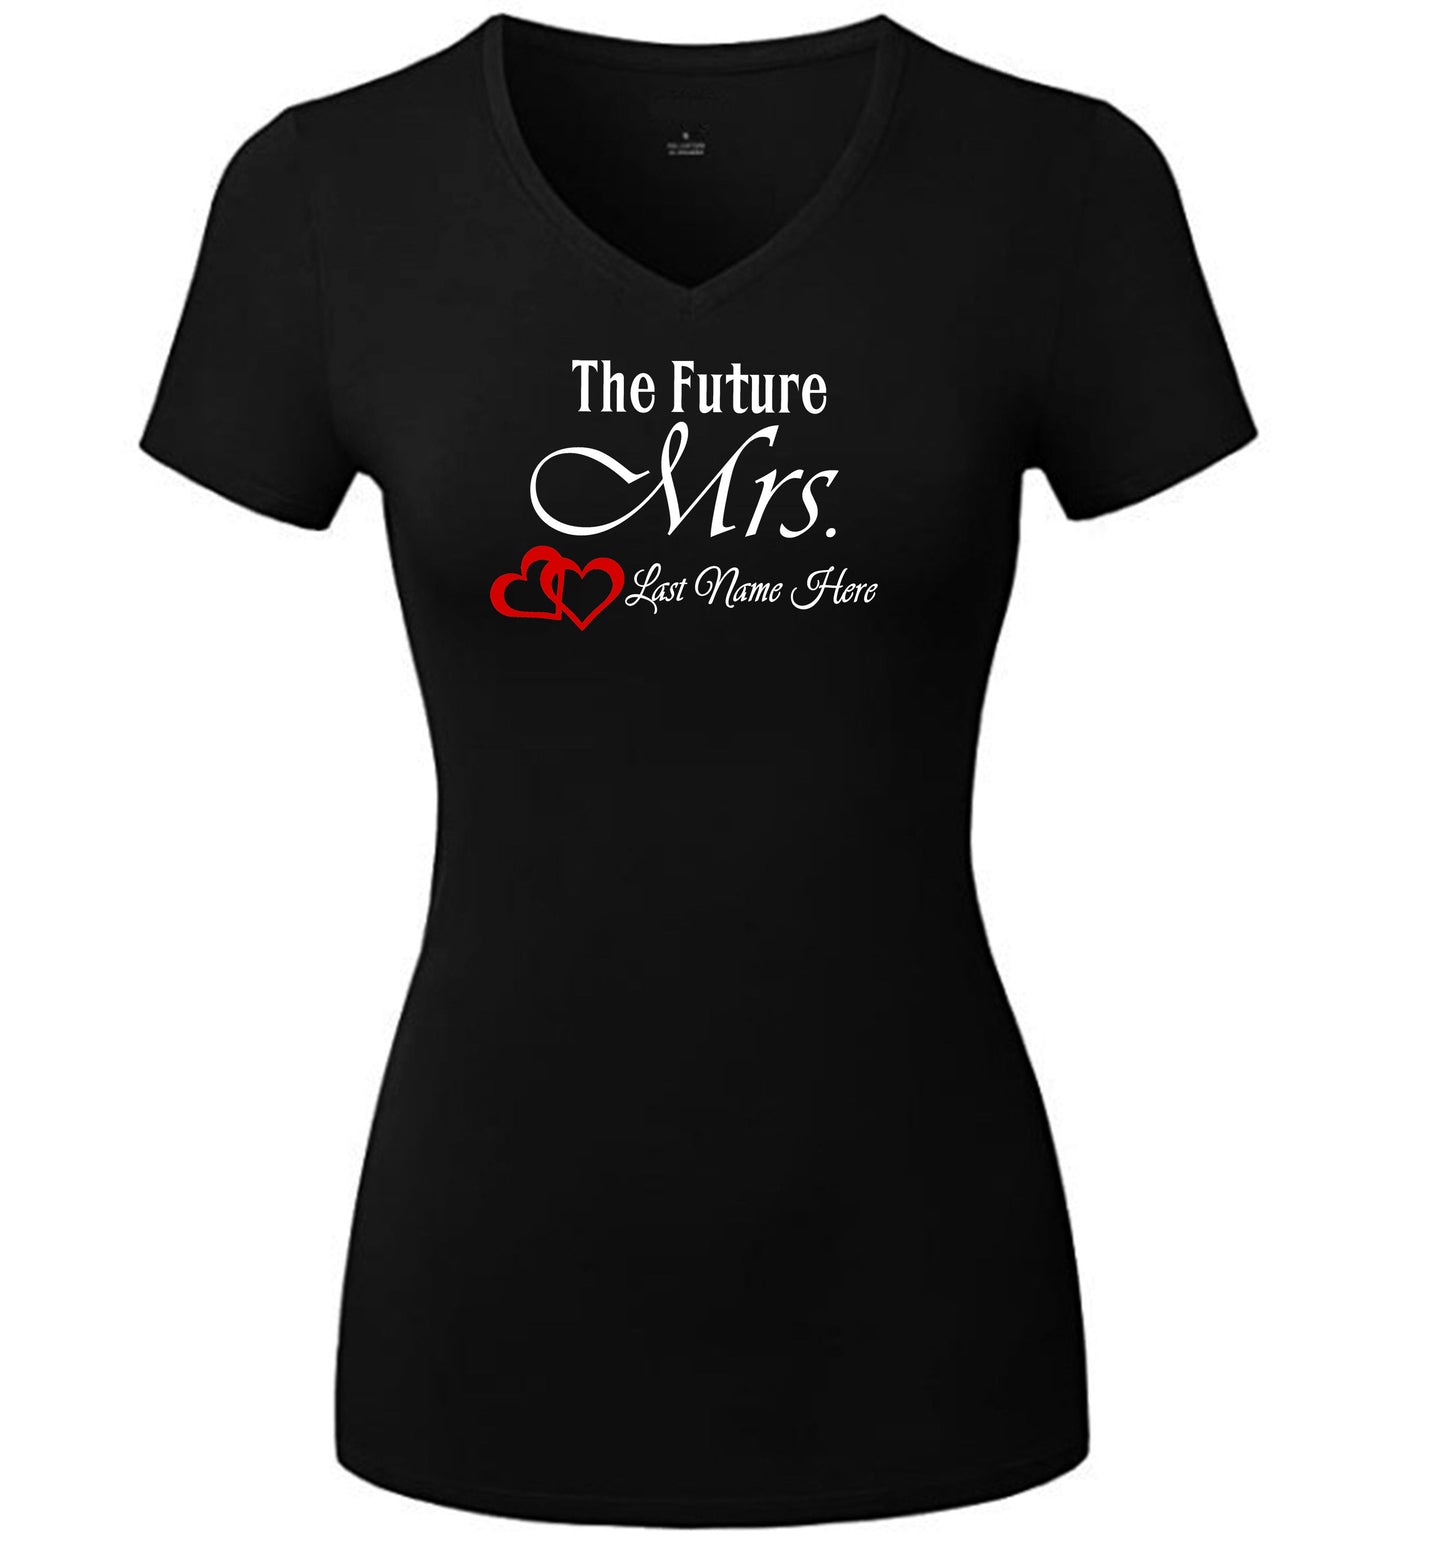 The Future Mrs Personalized T-Shirt